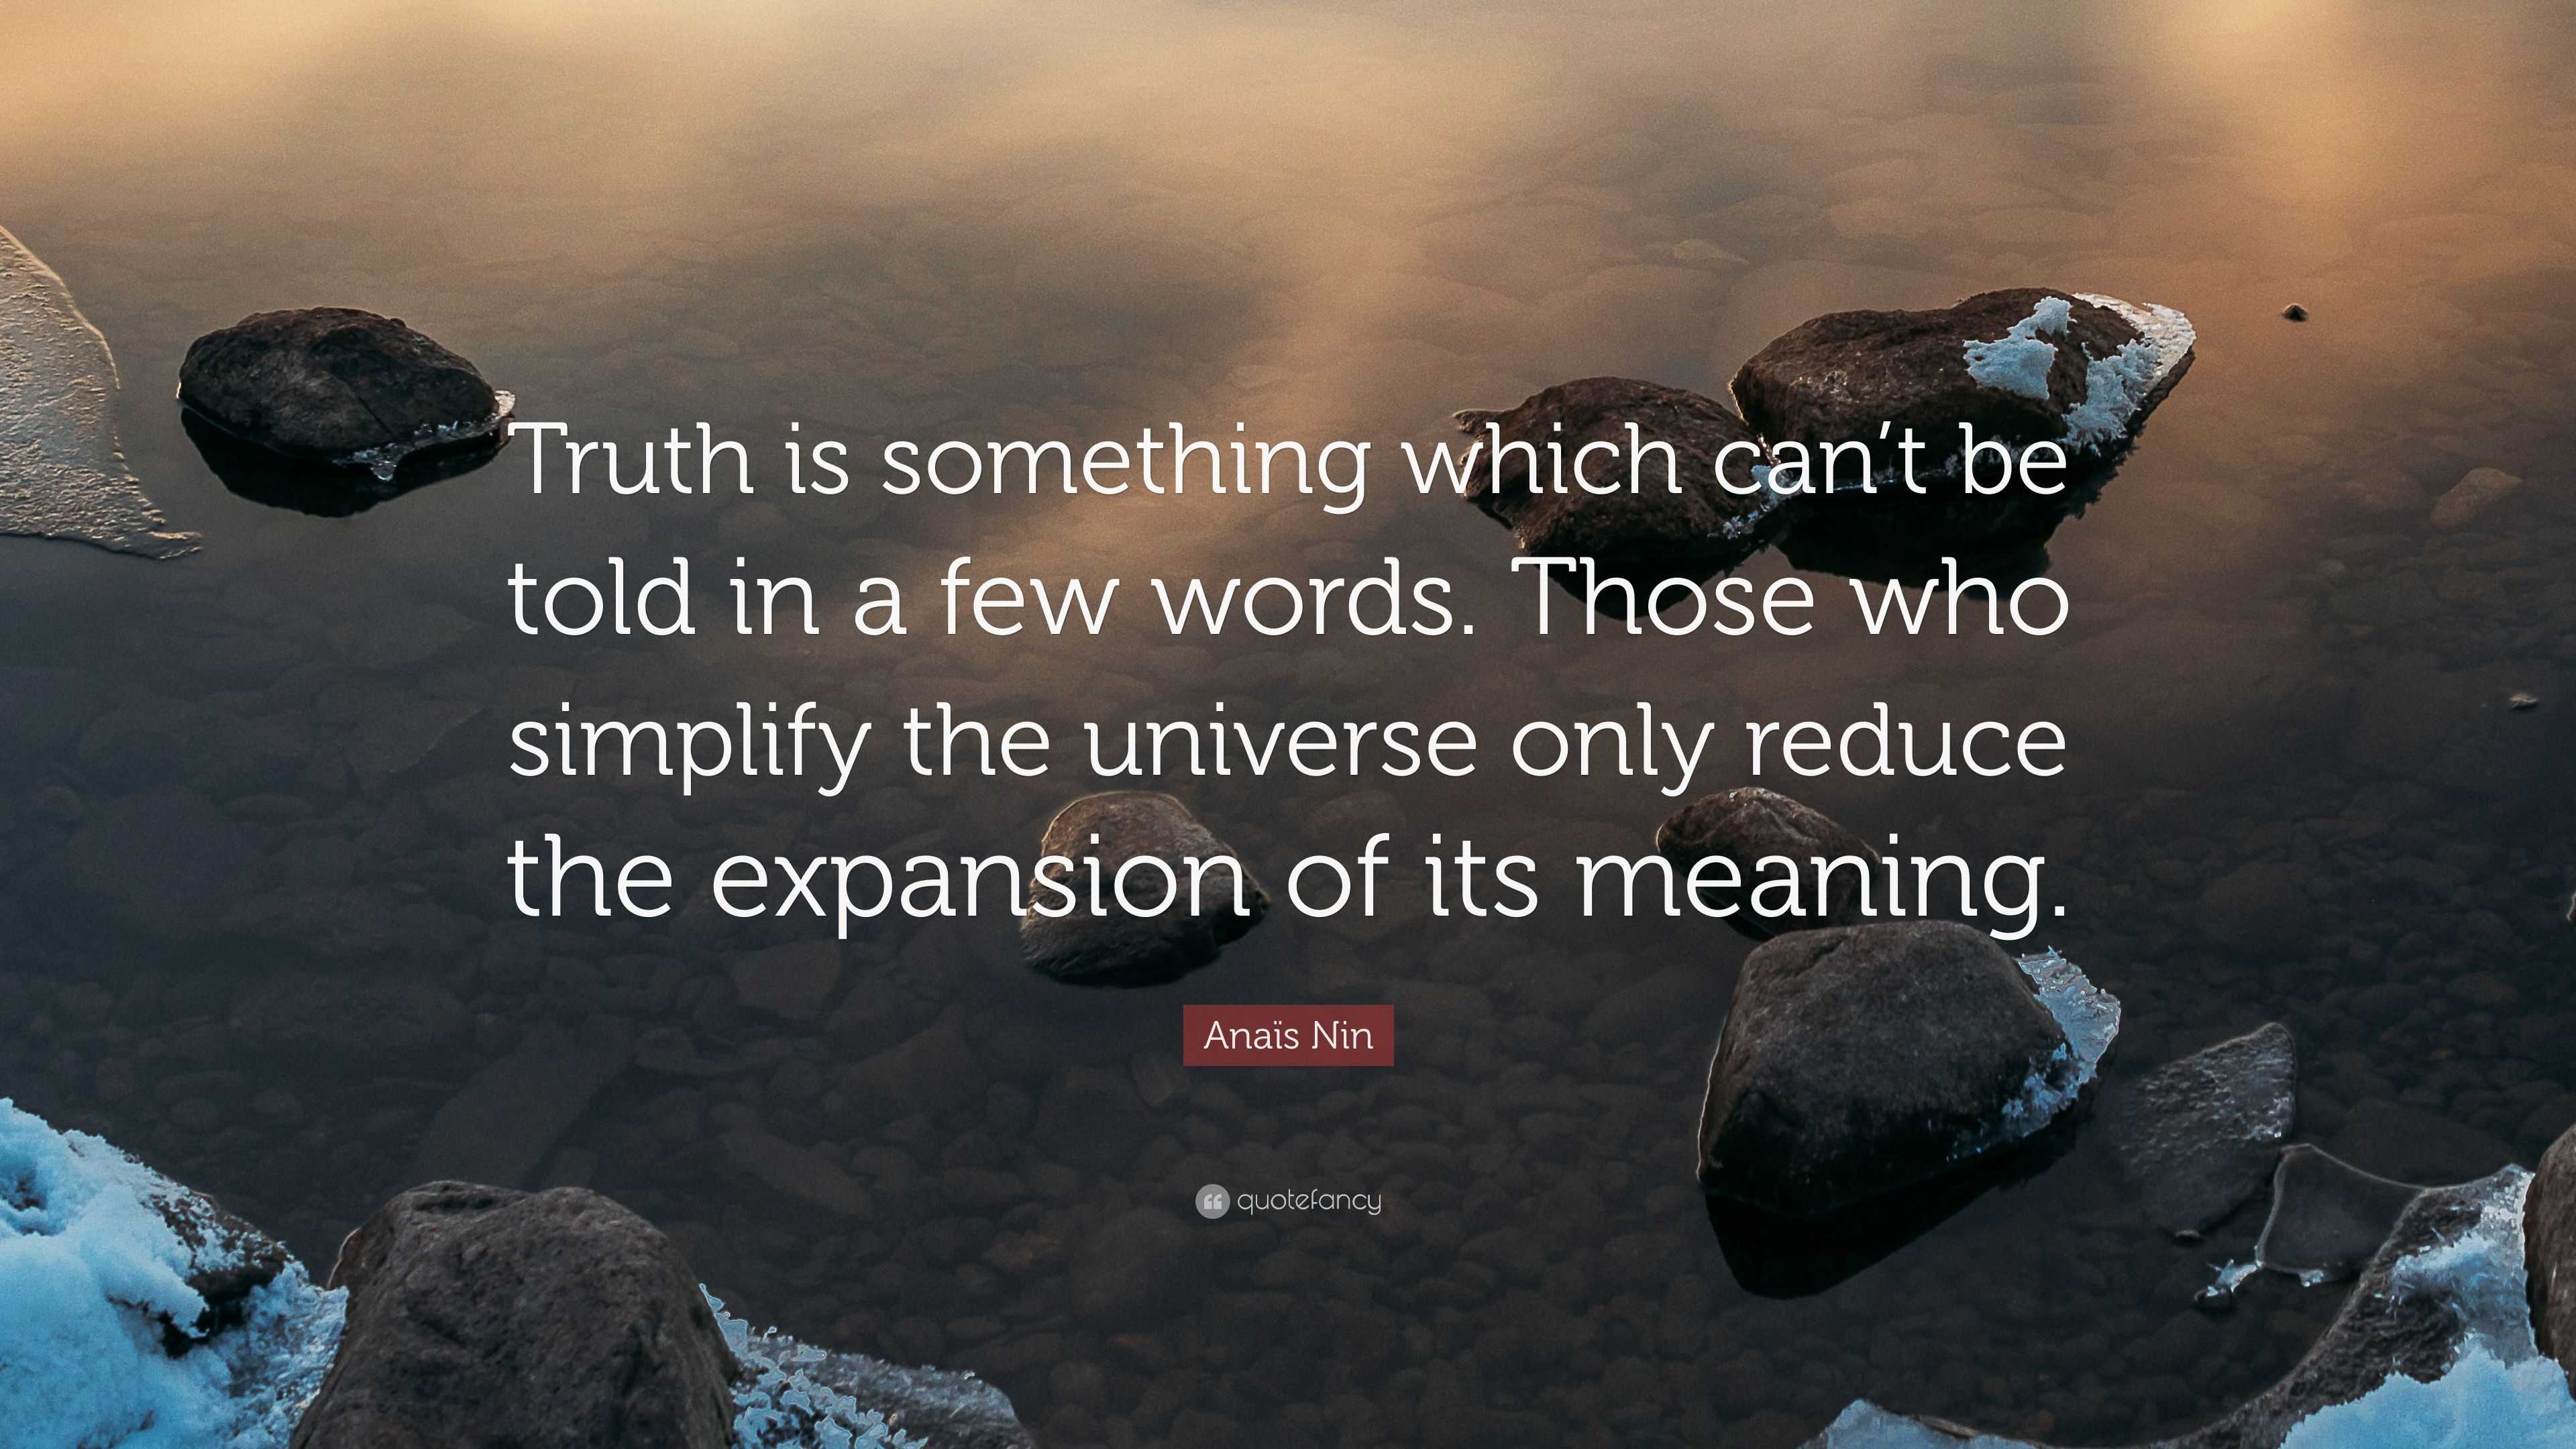 Anaïs Nin Quote: “Truth is something which can’t be told in a few words ...